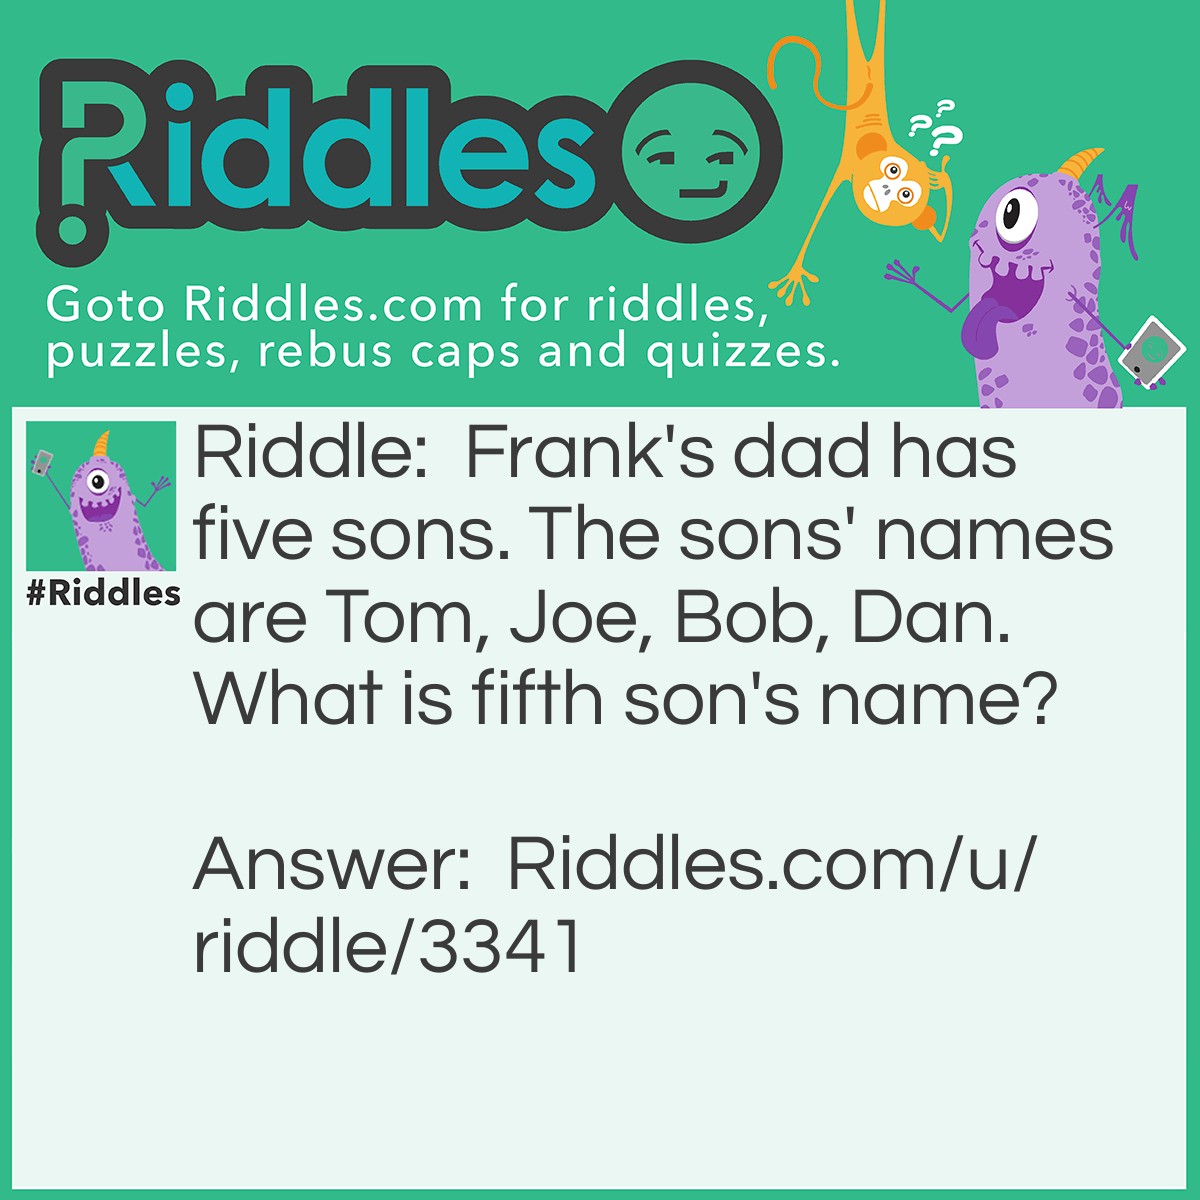 Riddle: Frank's dad has five sons. The sons' names are Tom, Joe, Bob, Dan. What is fifth son's name? Answer: It was Frank because it was Frank's dad.